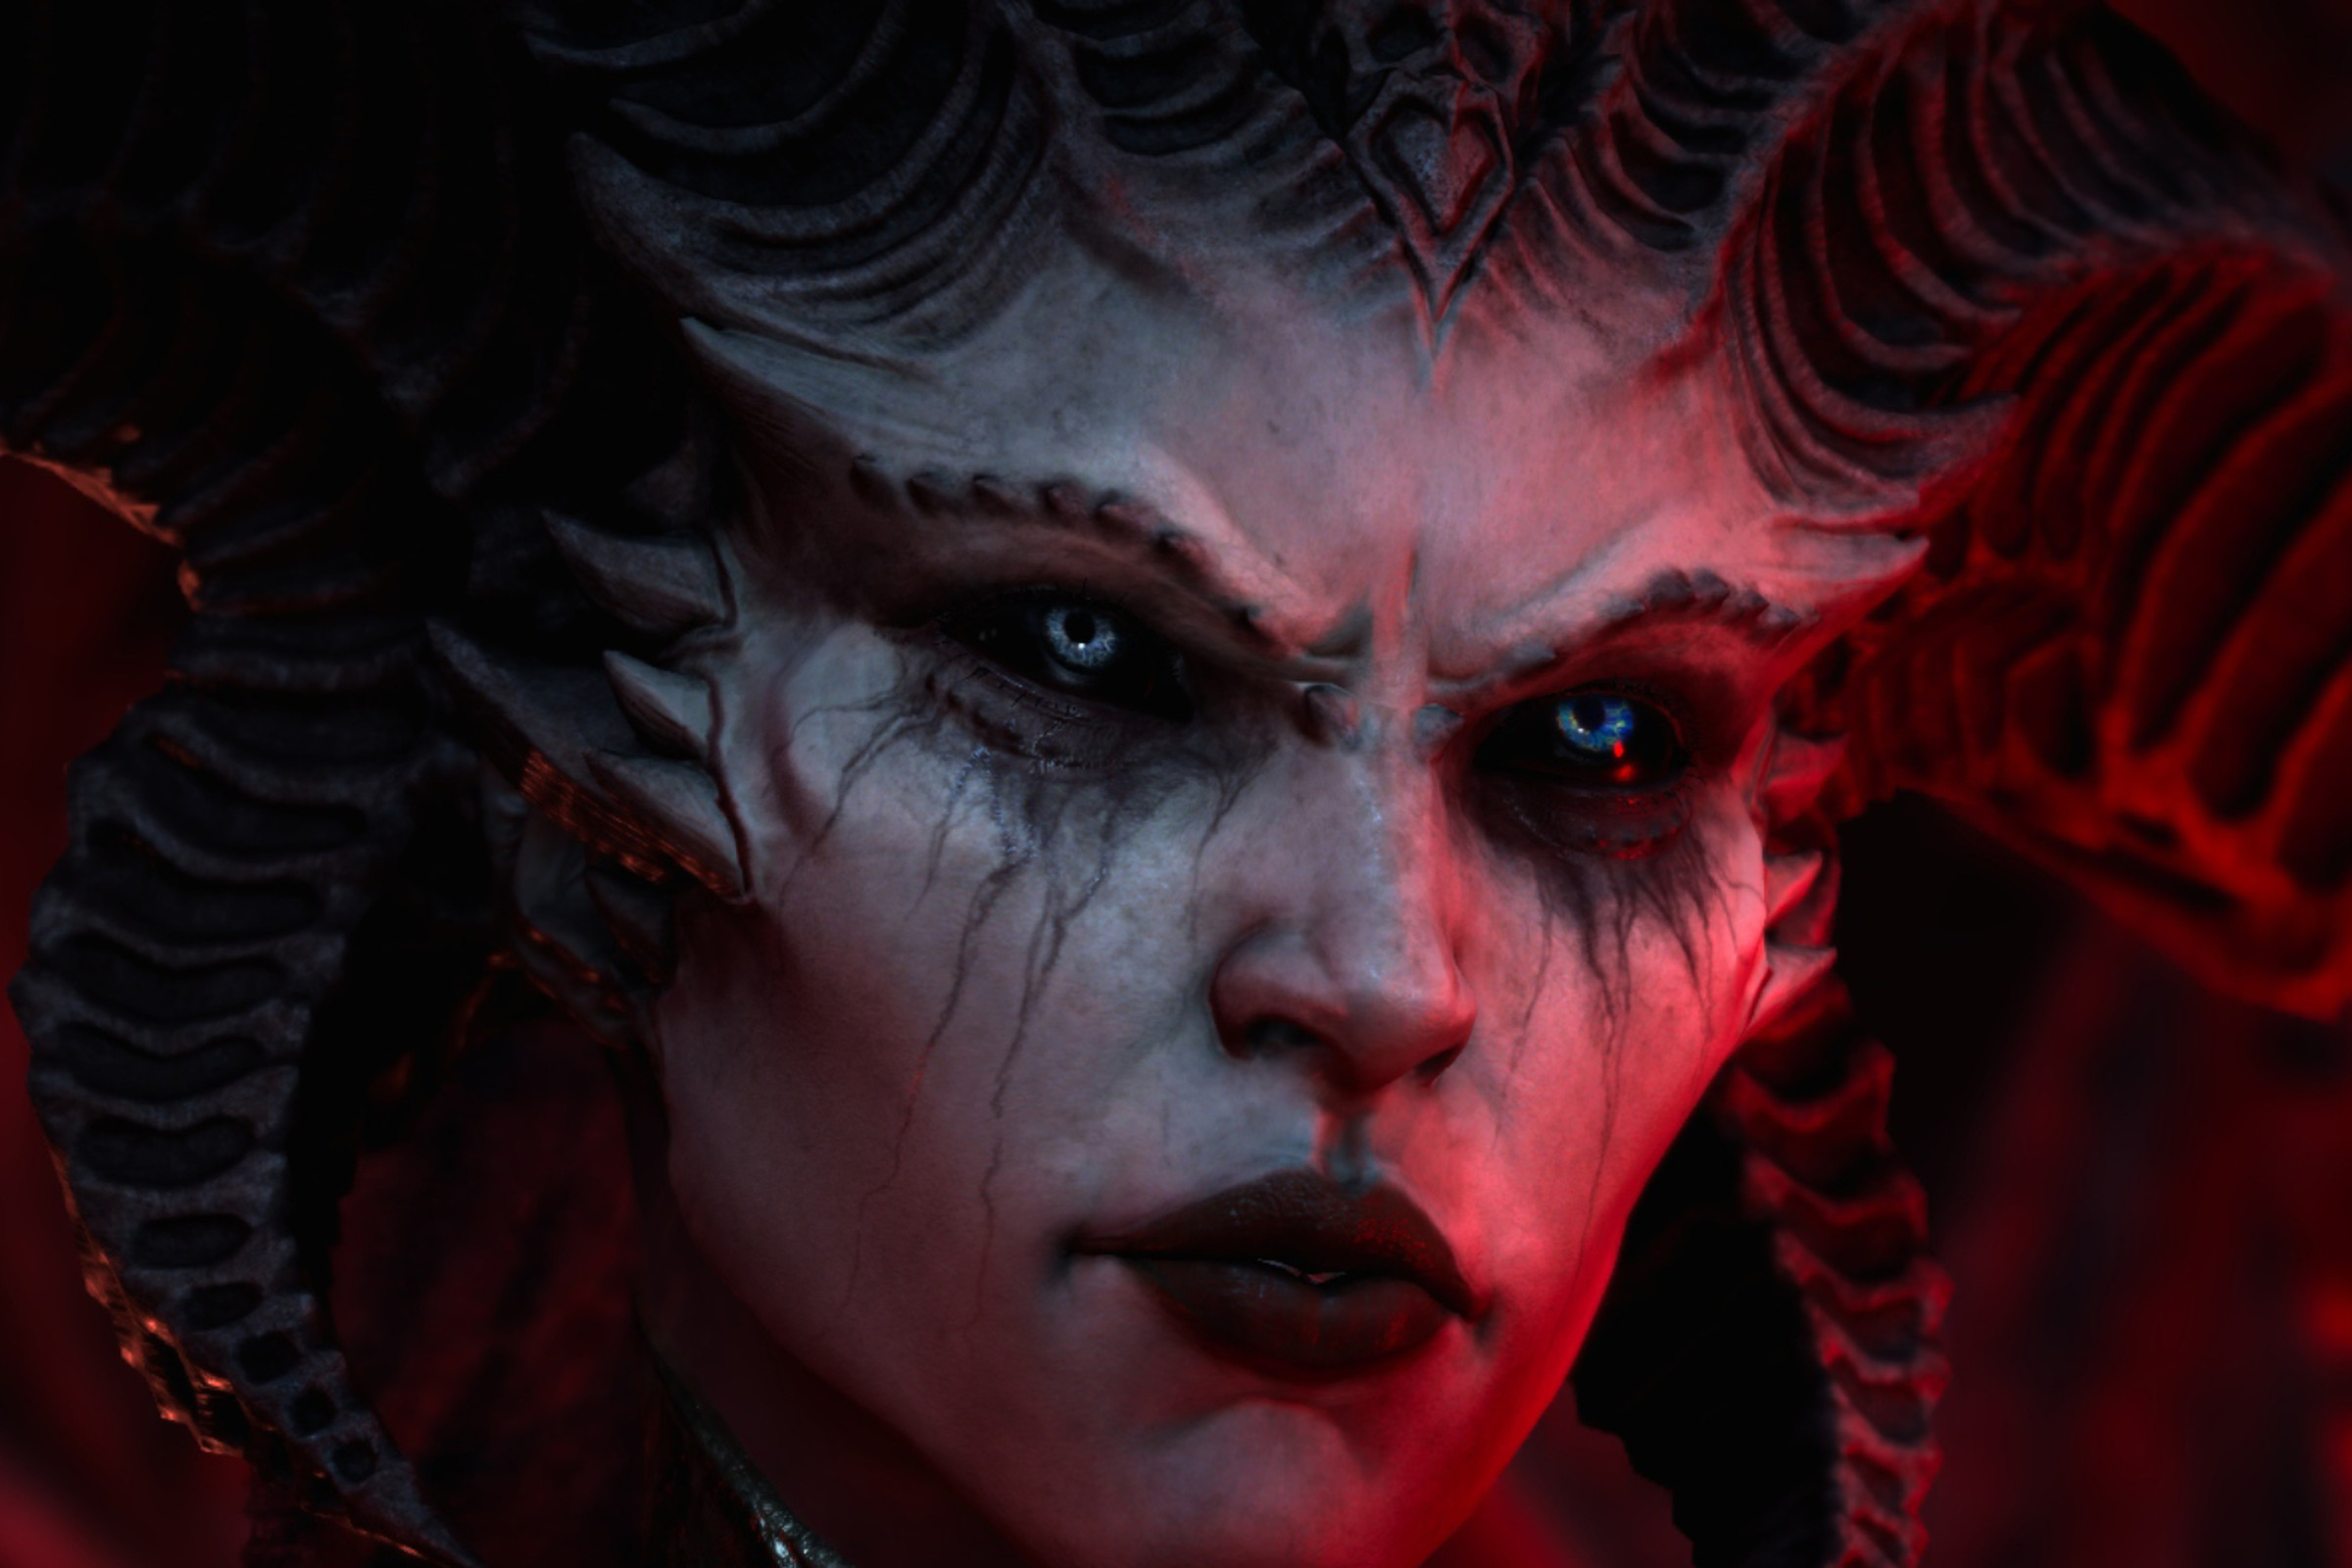 Screenshot from Diablo IV featuring a close up on the face of the demonic monster Lilith